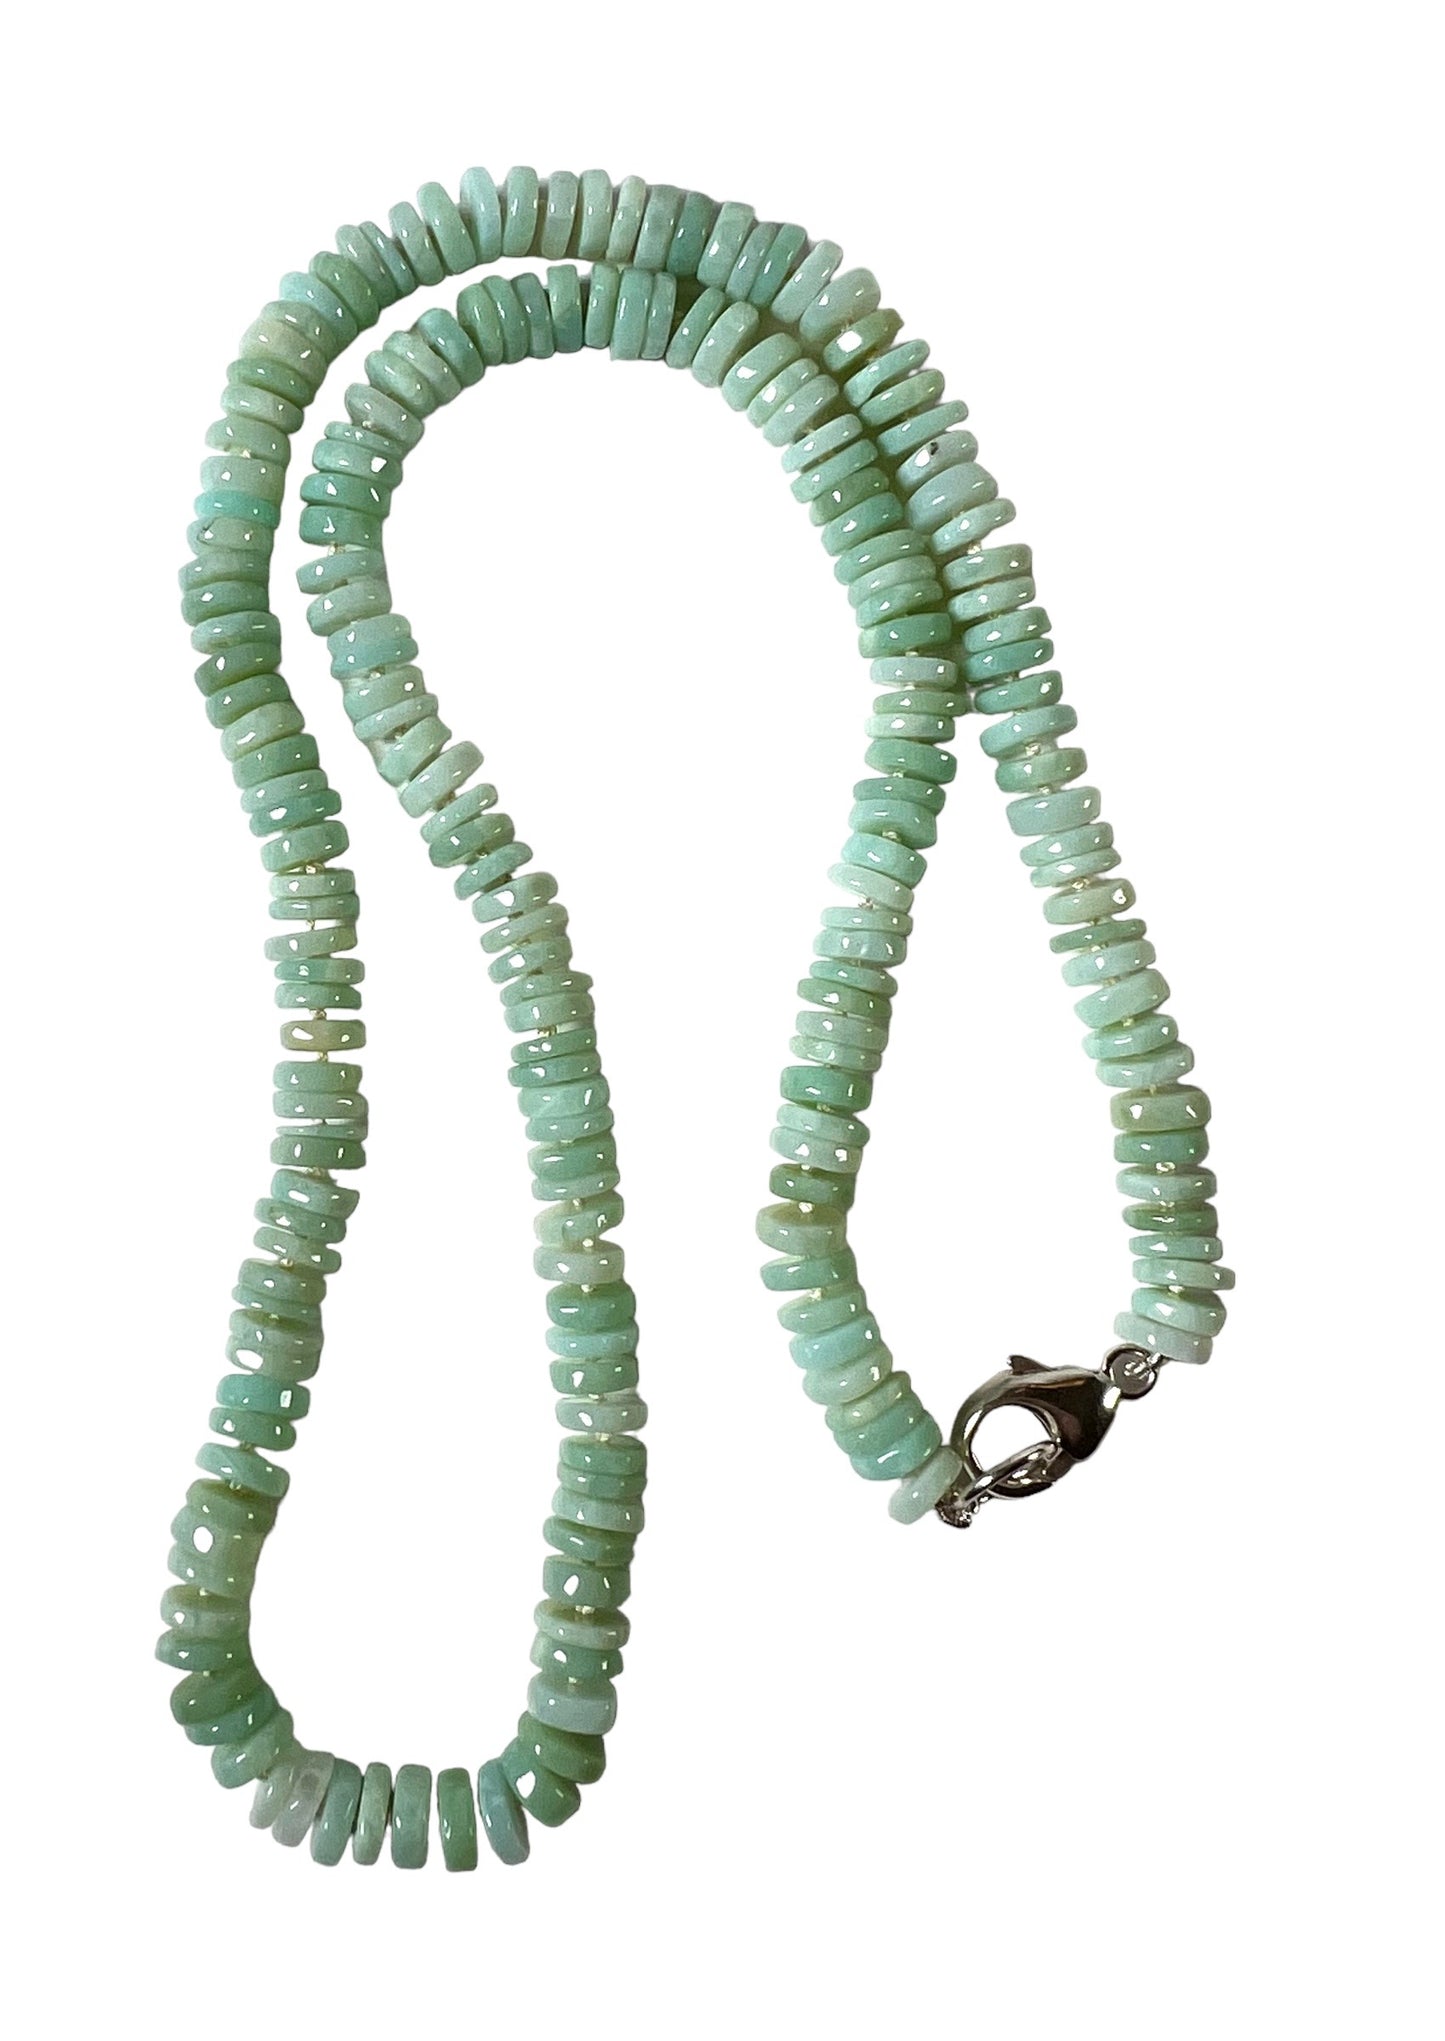 Pale green opal heishi necklace